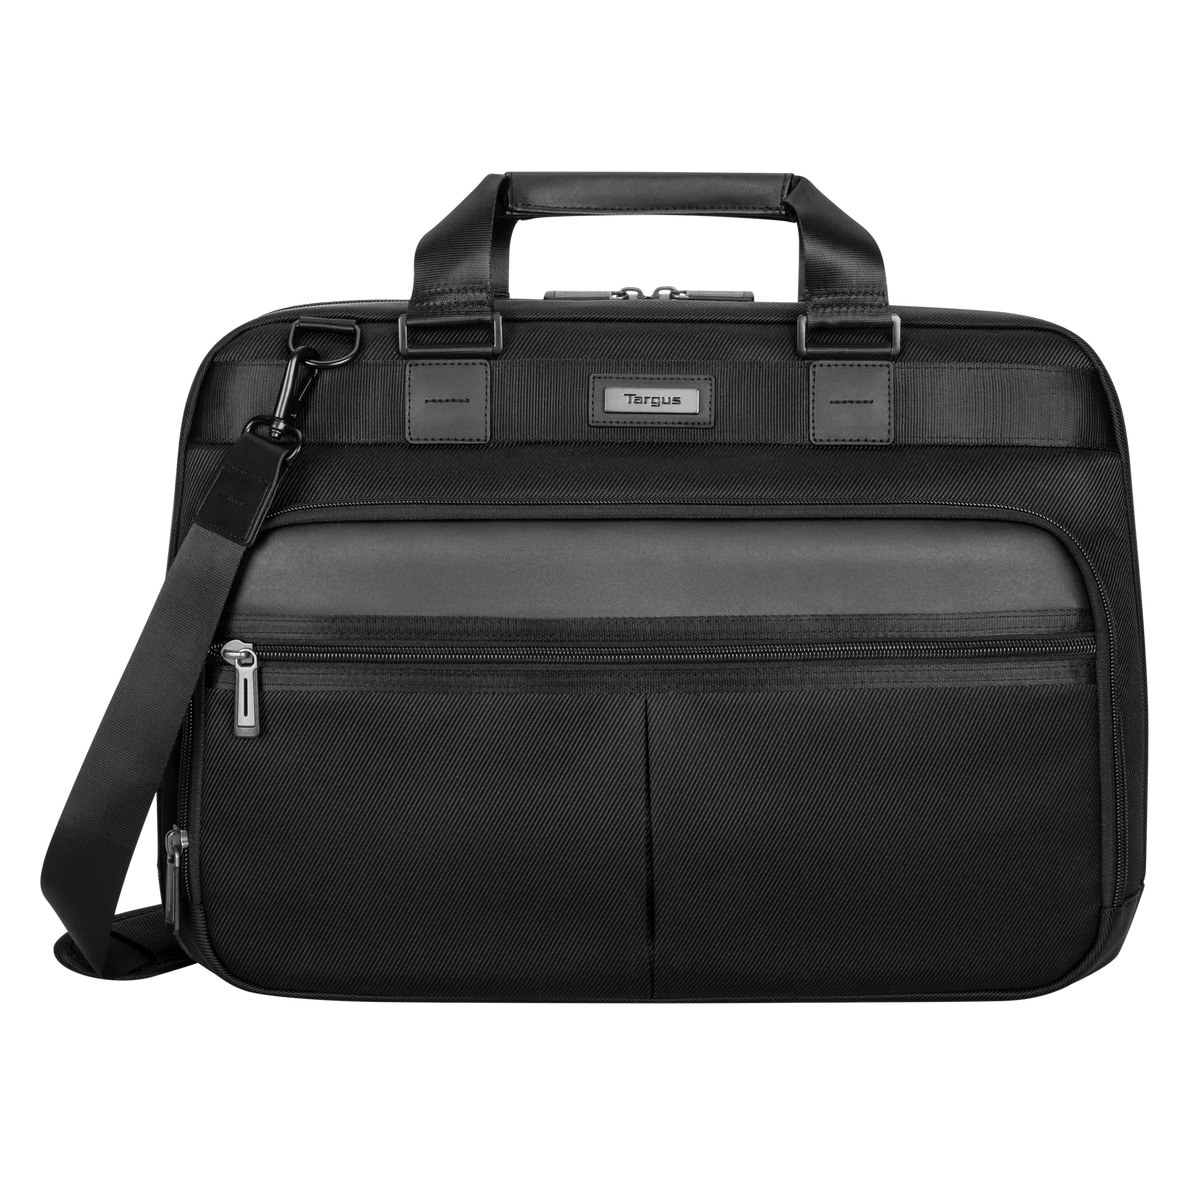 Targus Mobile Elite TBT045US Carrying Case (Briefcase) for 15" to 16" Notebook - Black, Gray